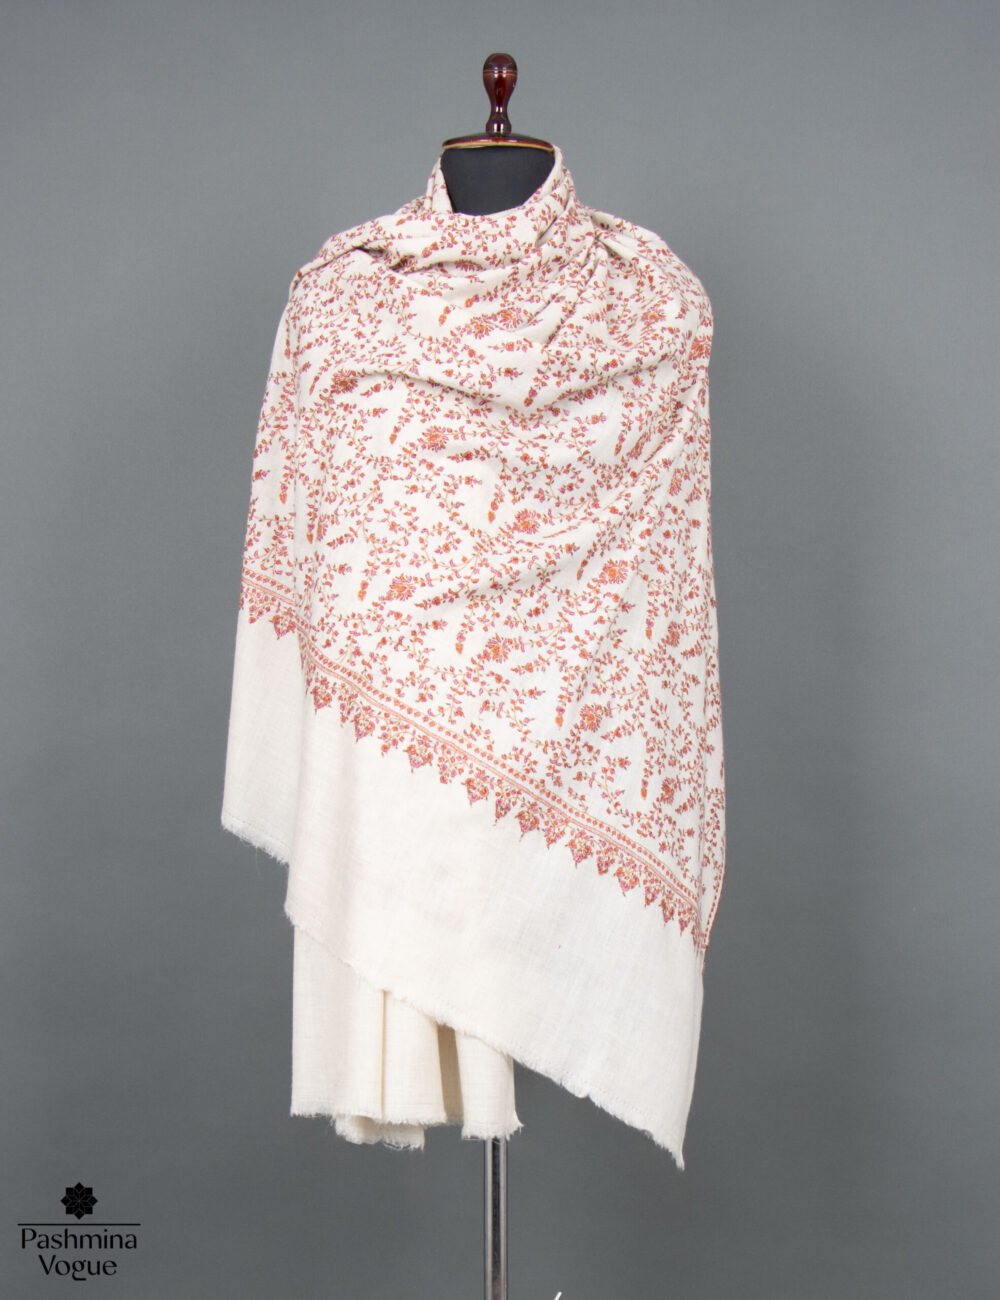 where-does-pashmina-come-from